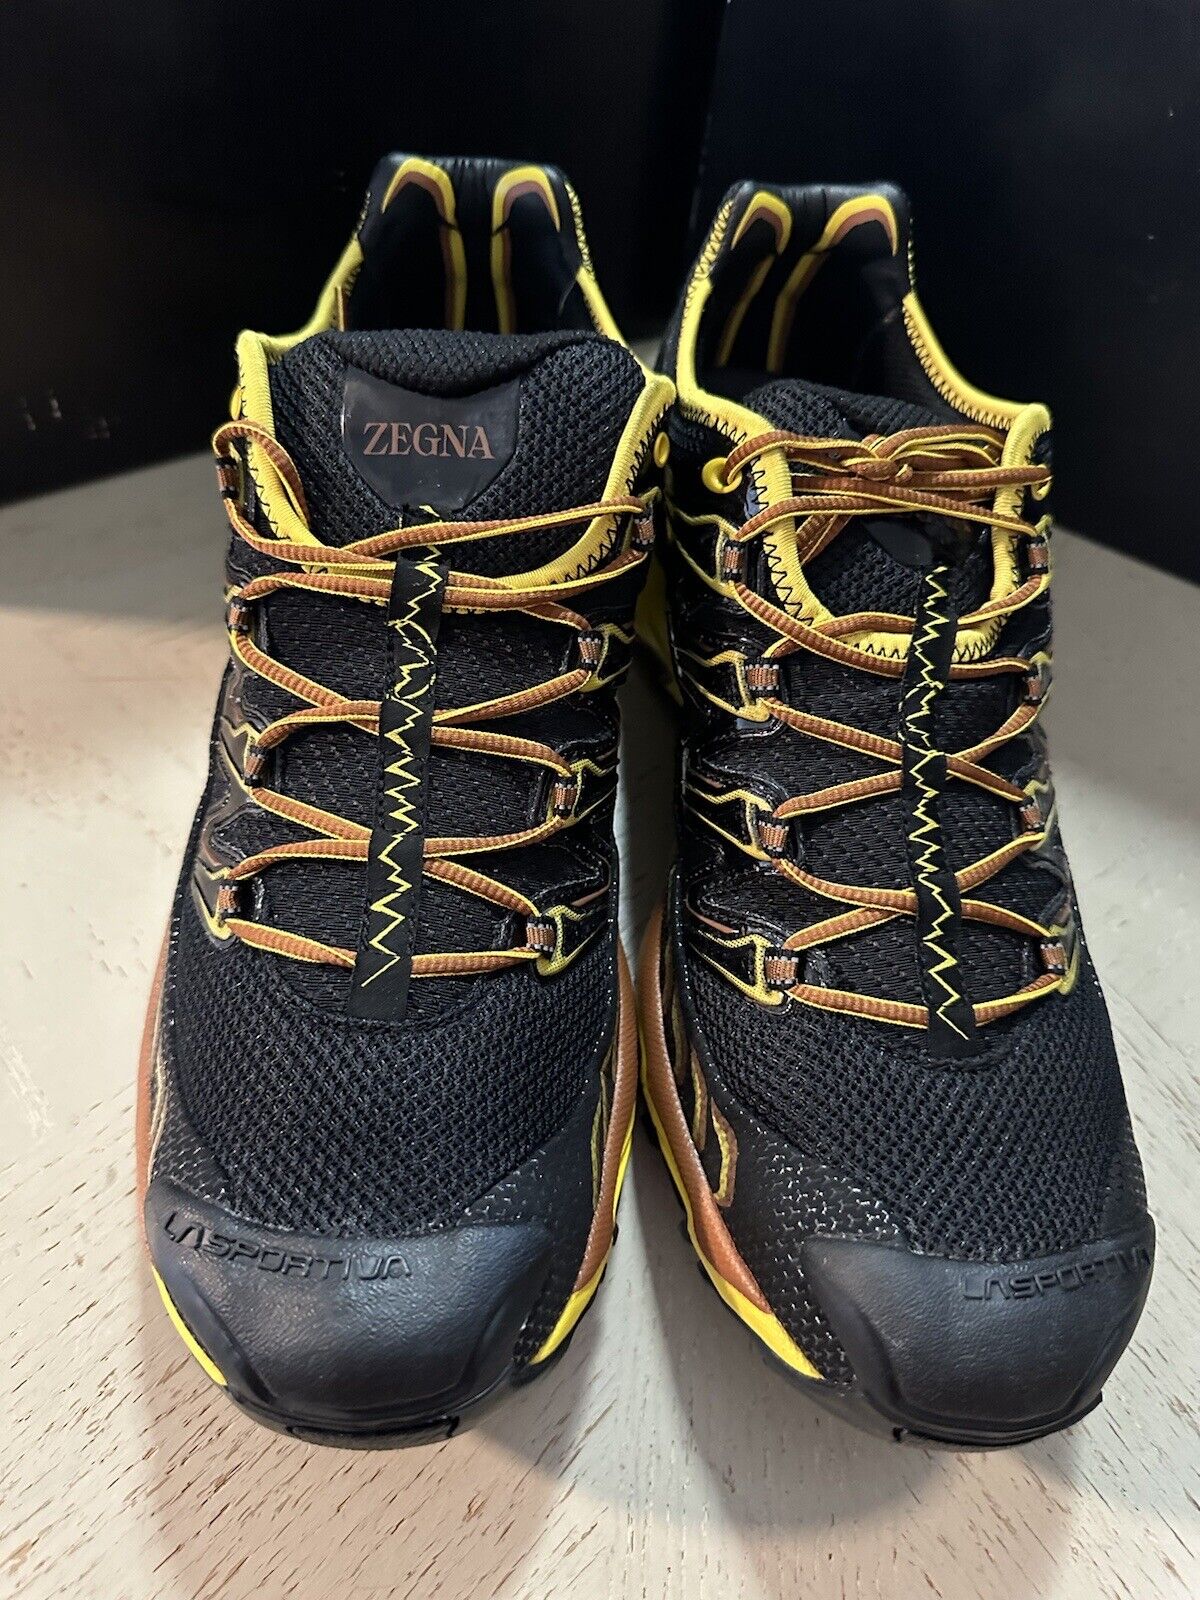 Zegna Men Sneakers Shoes Black/Yellow/Brown 8.5 US New